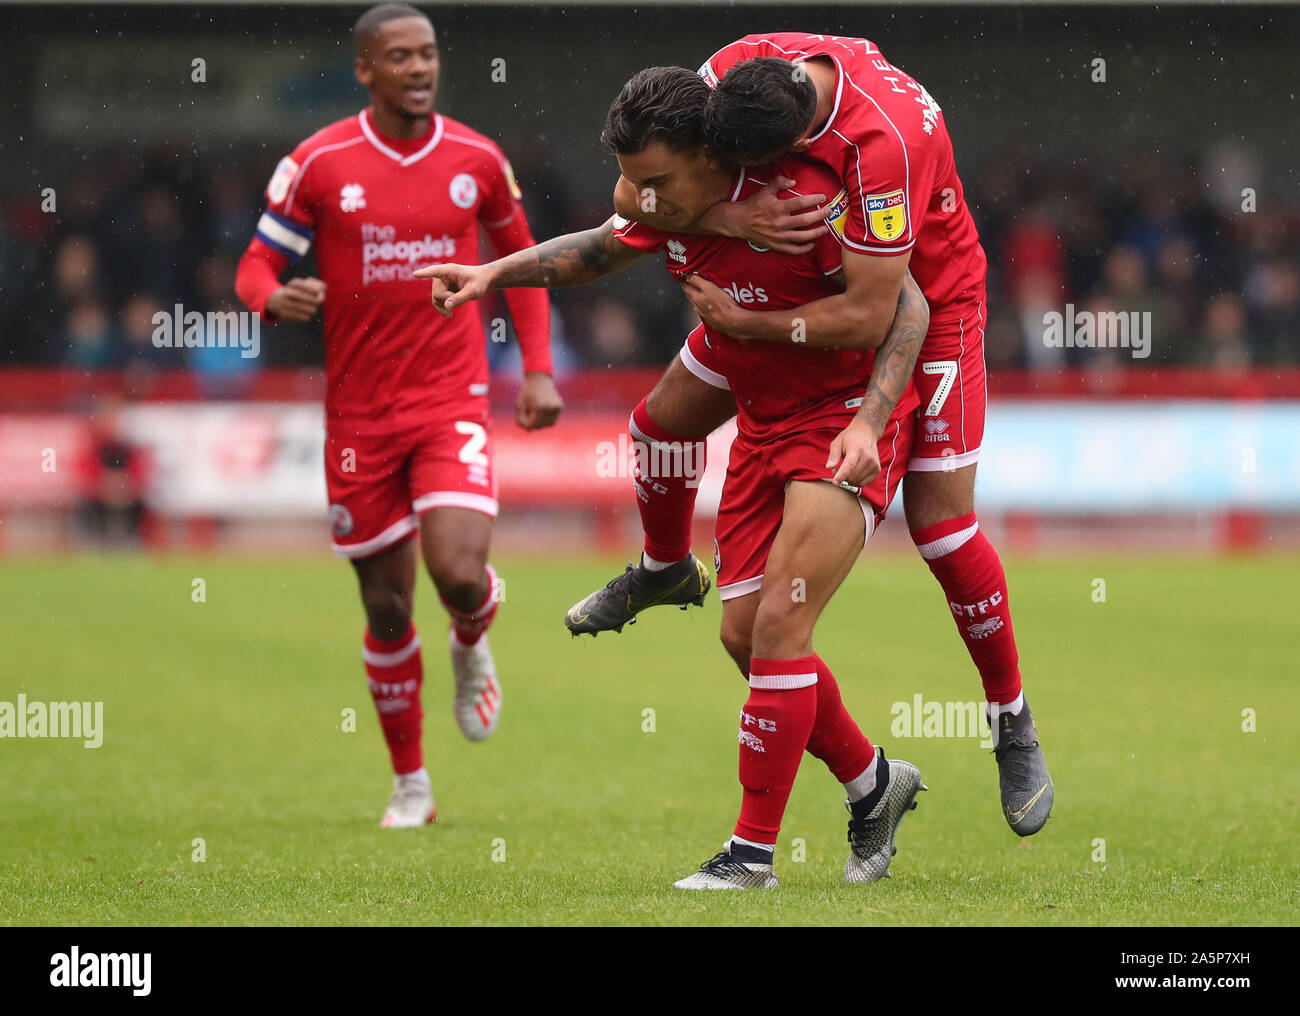 Crawley, UK. 12 October 2019 Crawley Town's Reece Grego-Cox celebrates scoring the equaliser during the Sky Bet League Two match between Crawley Town and Colchester United at the Peoples Pension Stadium in Crawley. Credit: Telephoto Images / Alamy Live News Stock Photo